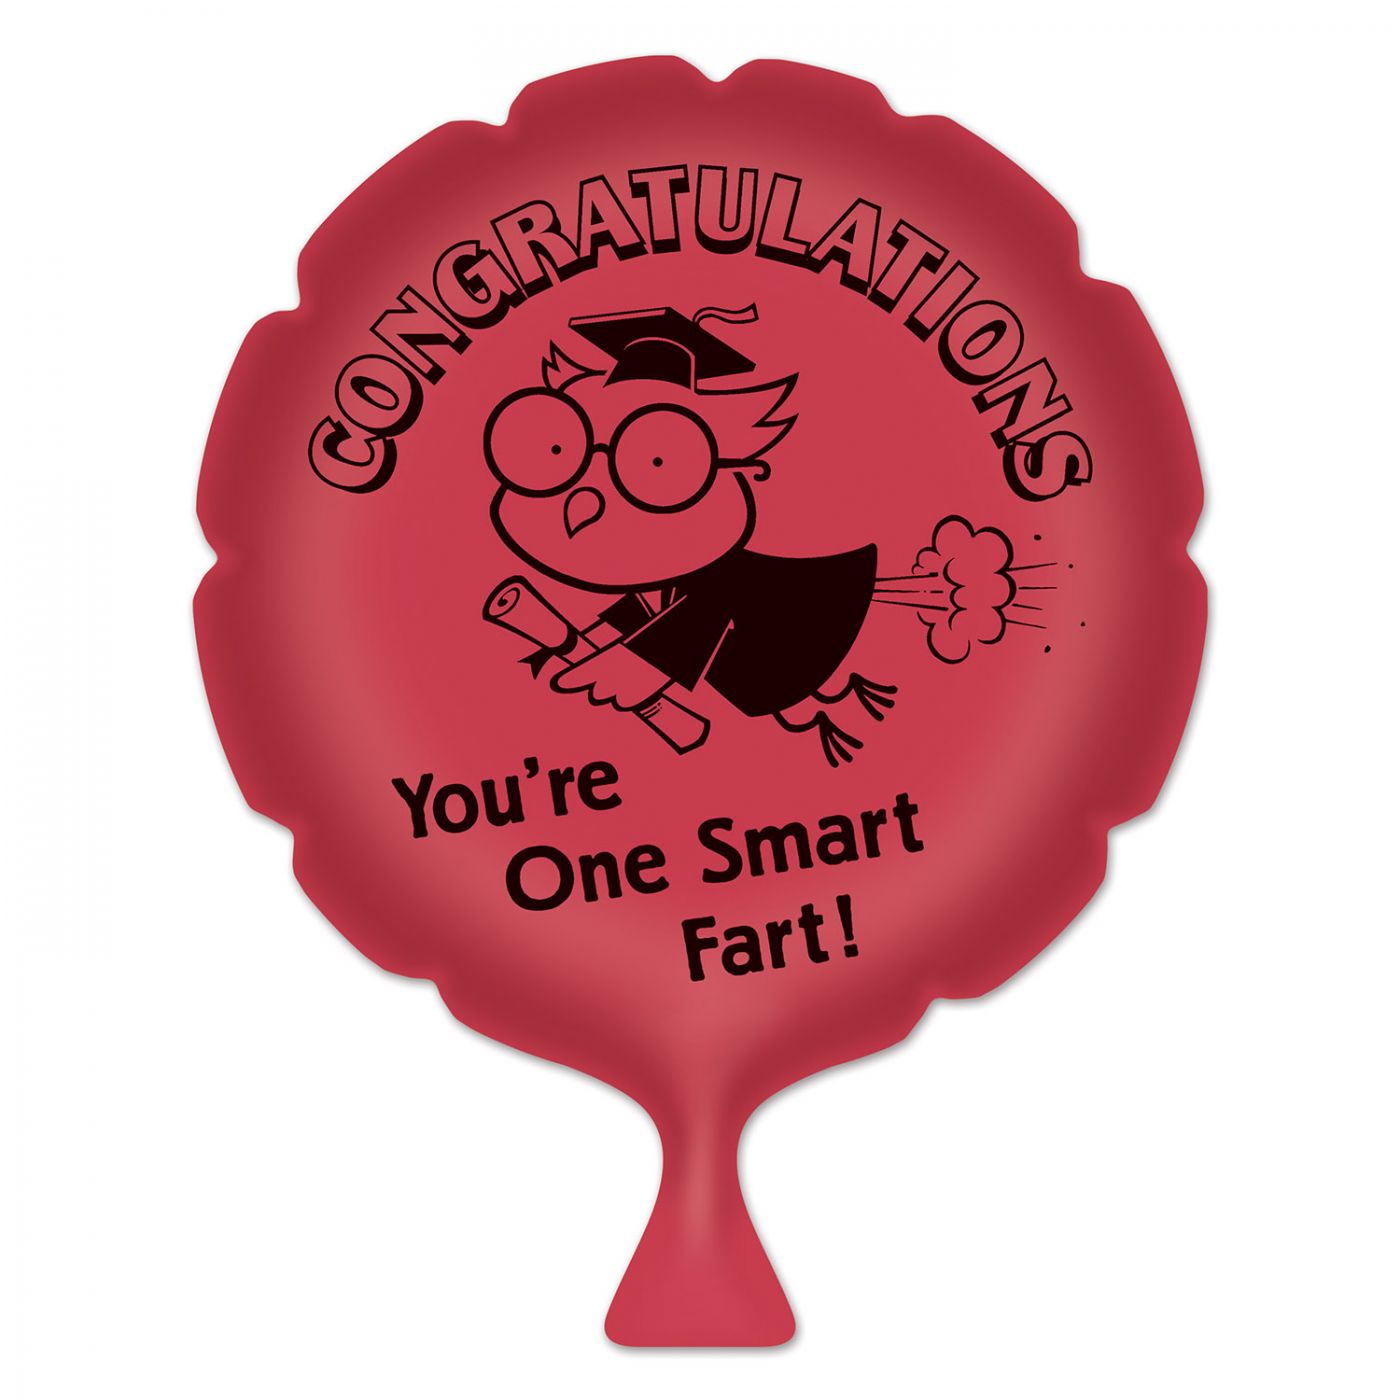 You're One Smart Fart! Whoopee Cushion (6) image